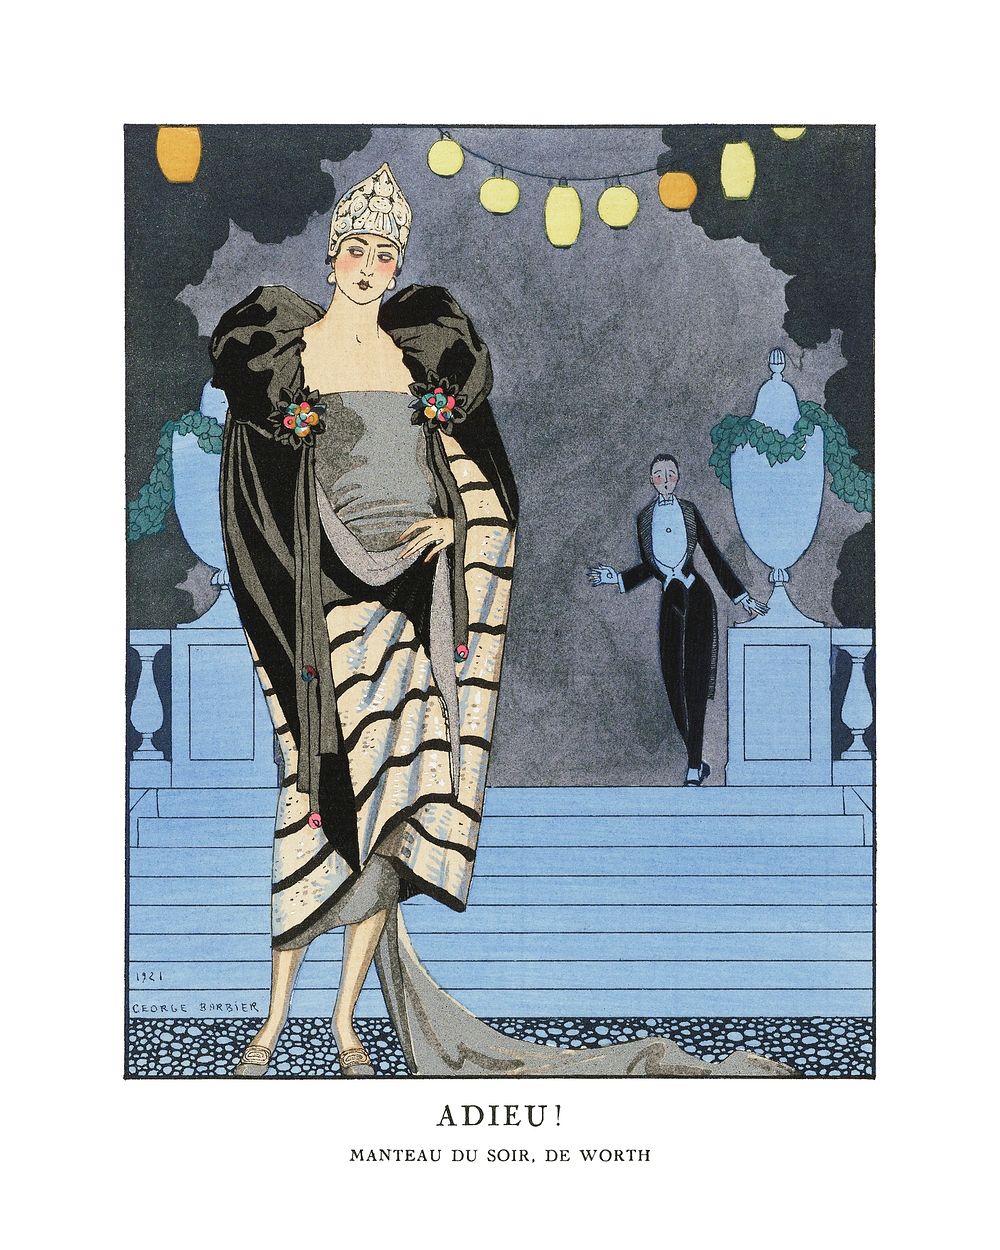 Flapper woman poster, art deco fashion illustration remix from the artwork of George Barbier